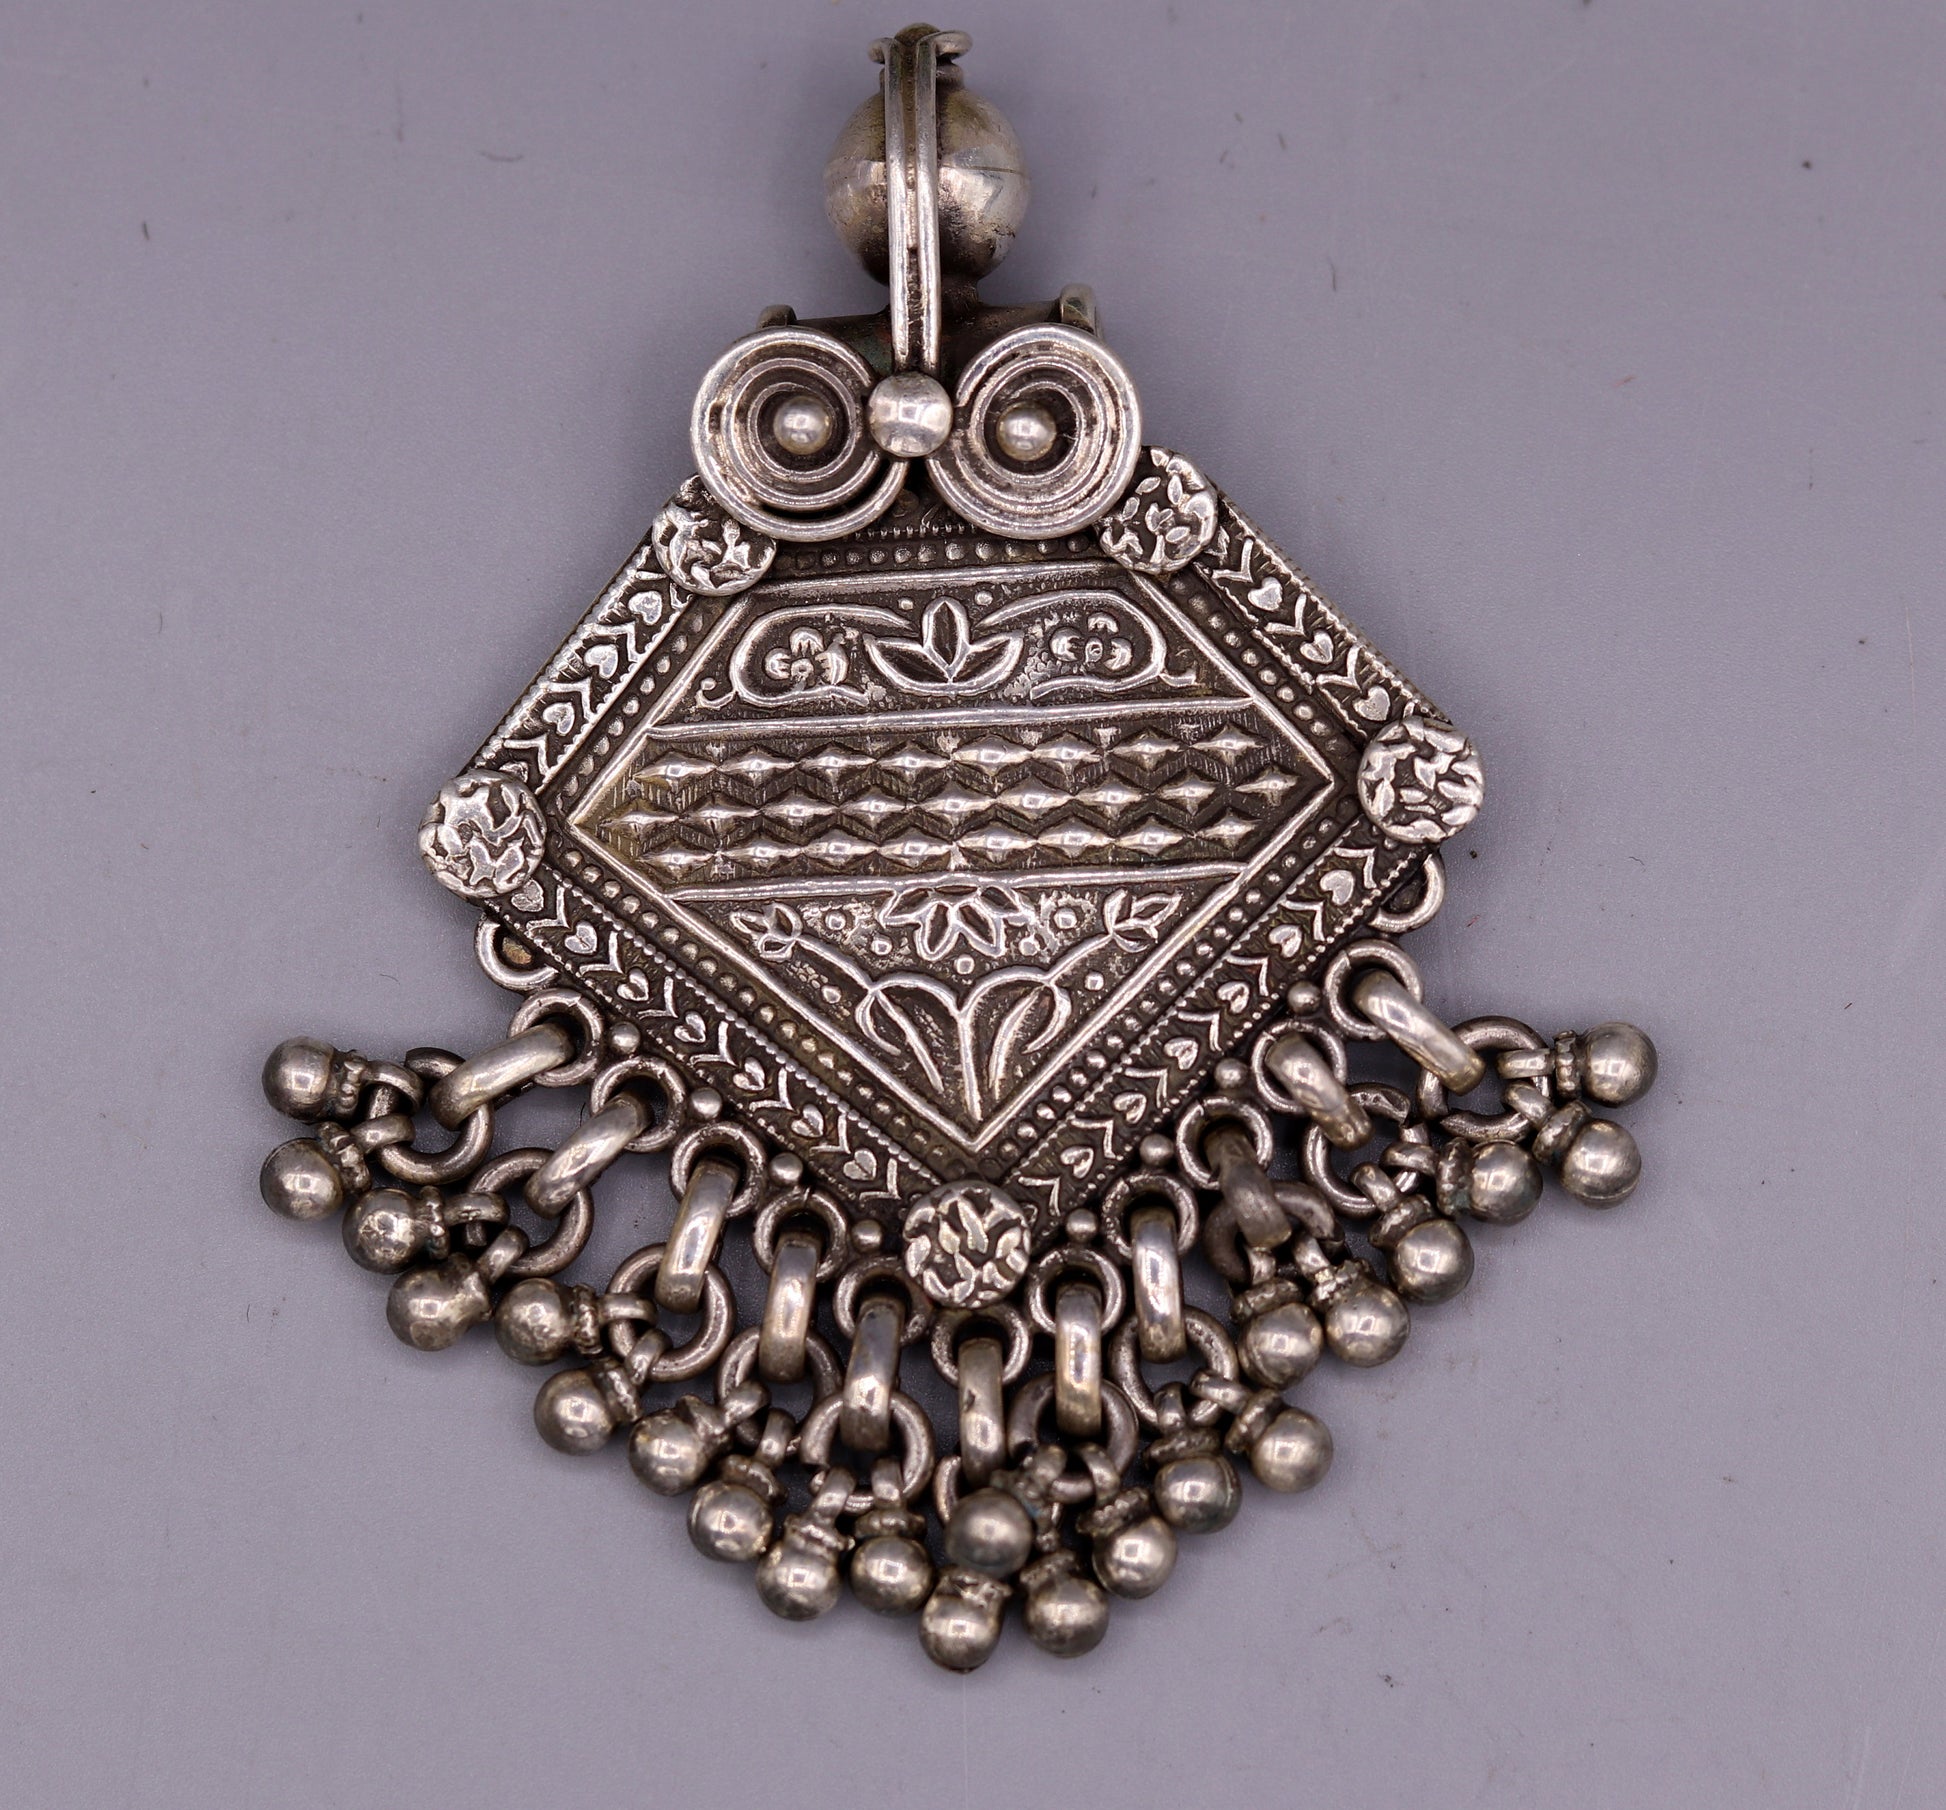 Vintage antique design Handmade 925 sterling silver excellent tribal pendant with hanging bells gifting women's jewelry nsp257 - TRIBAL ORNAMENTS